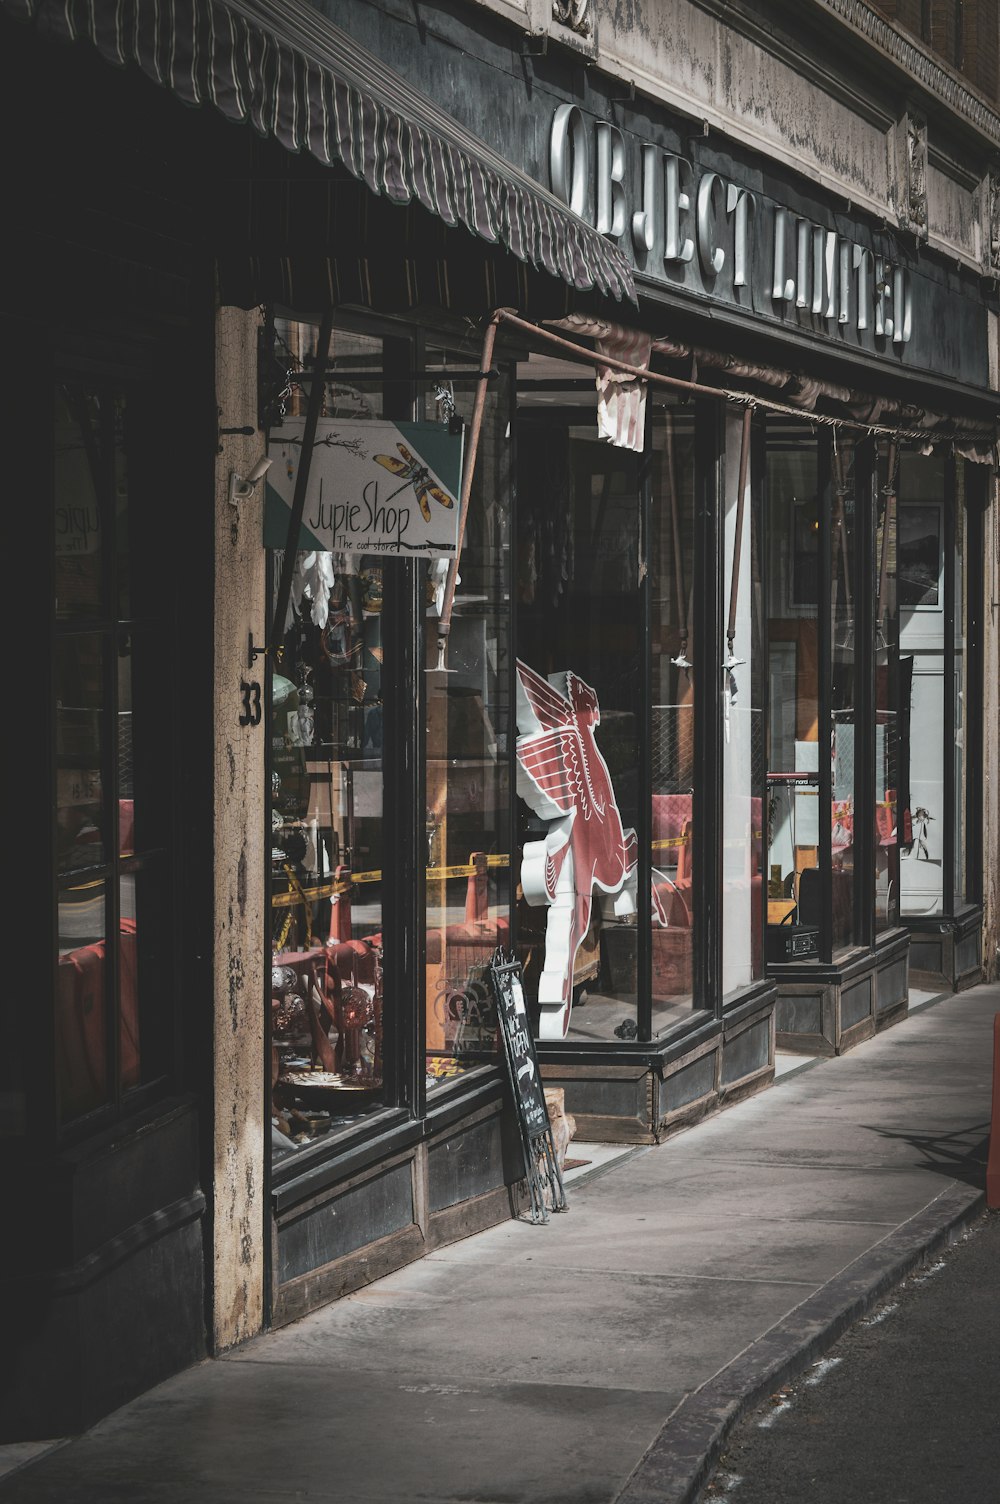 a storefront on a city street with a bicycle leaning against it